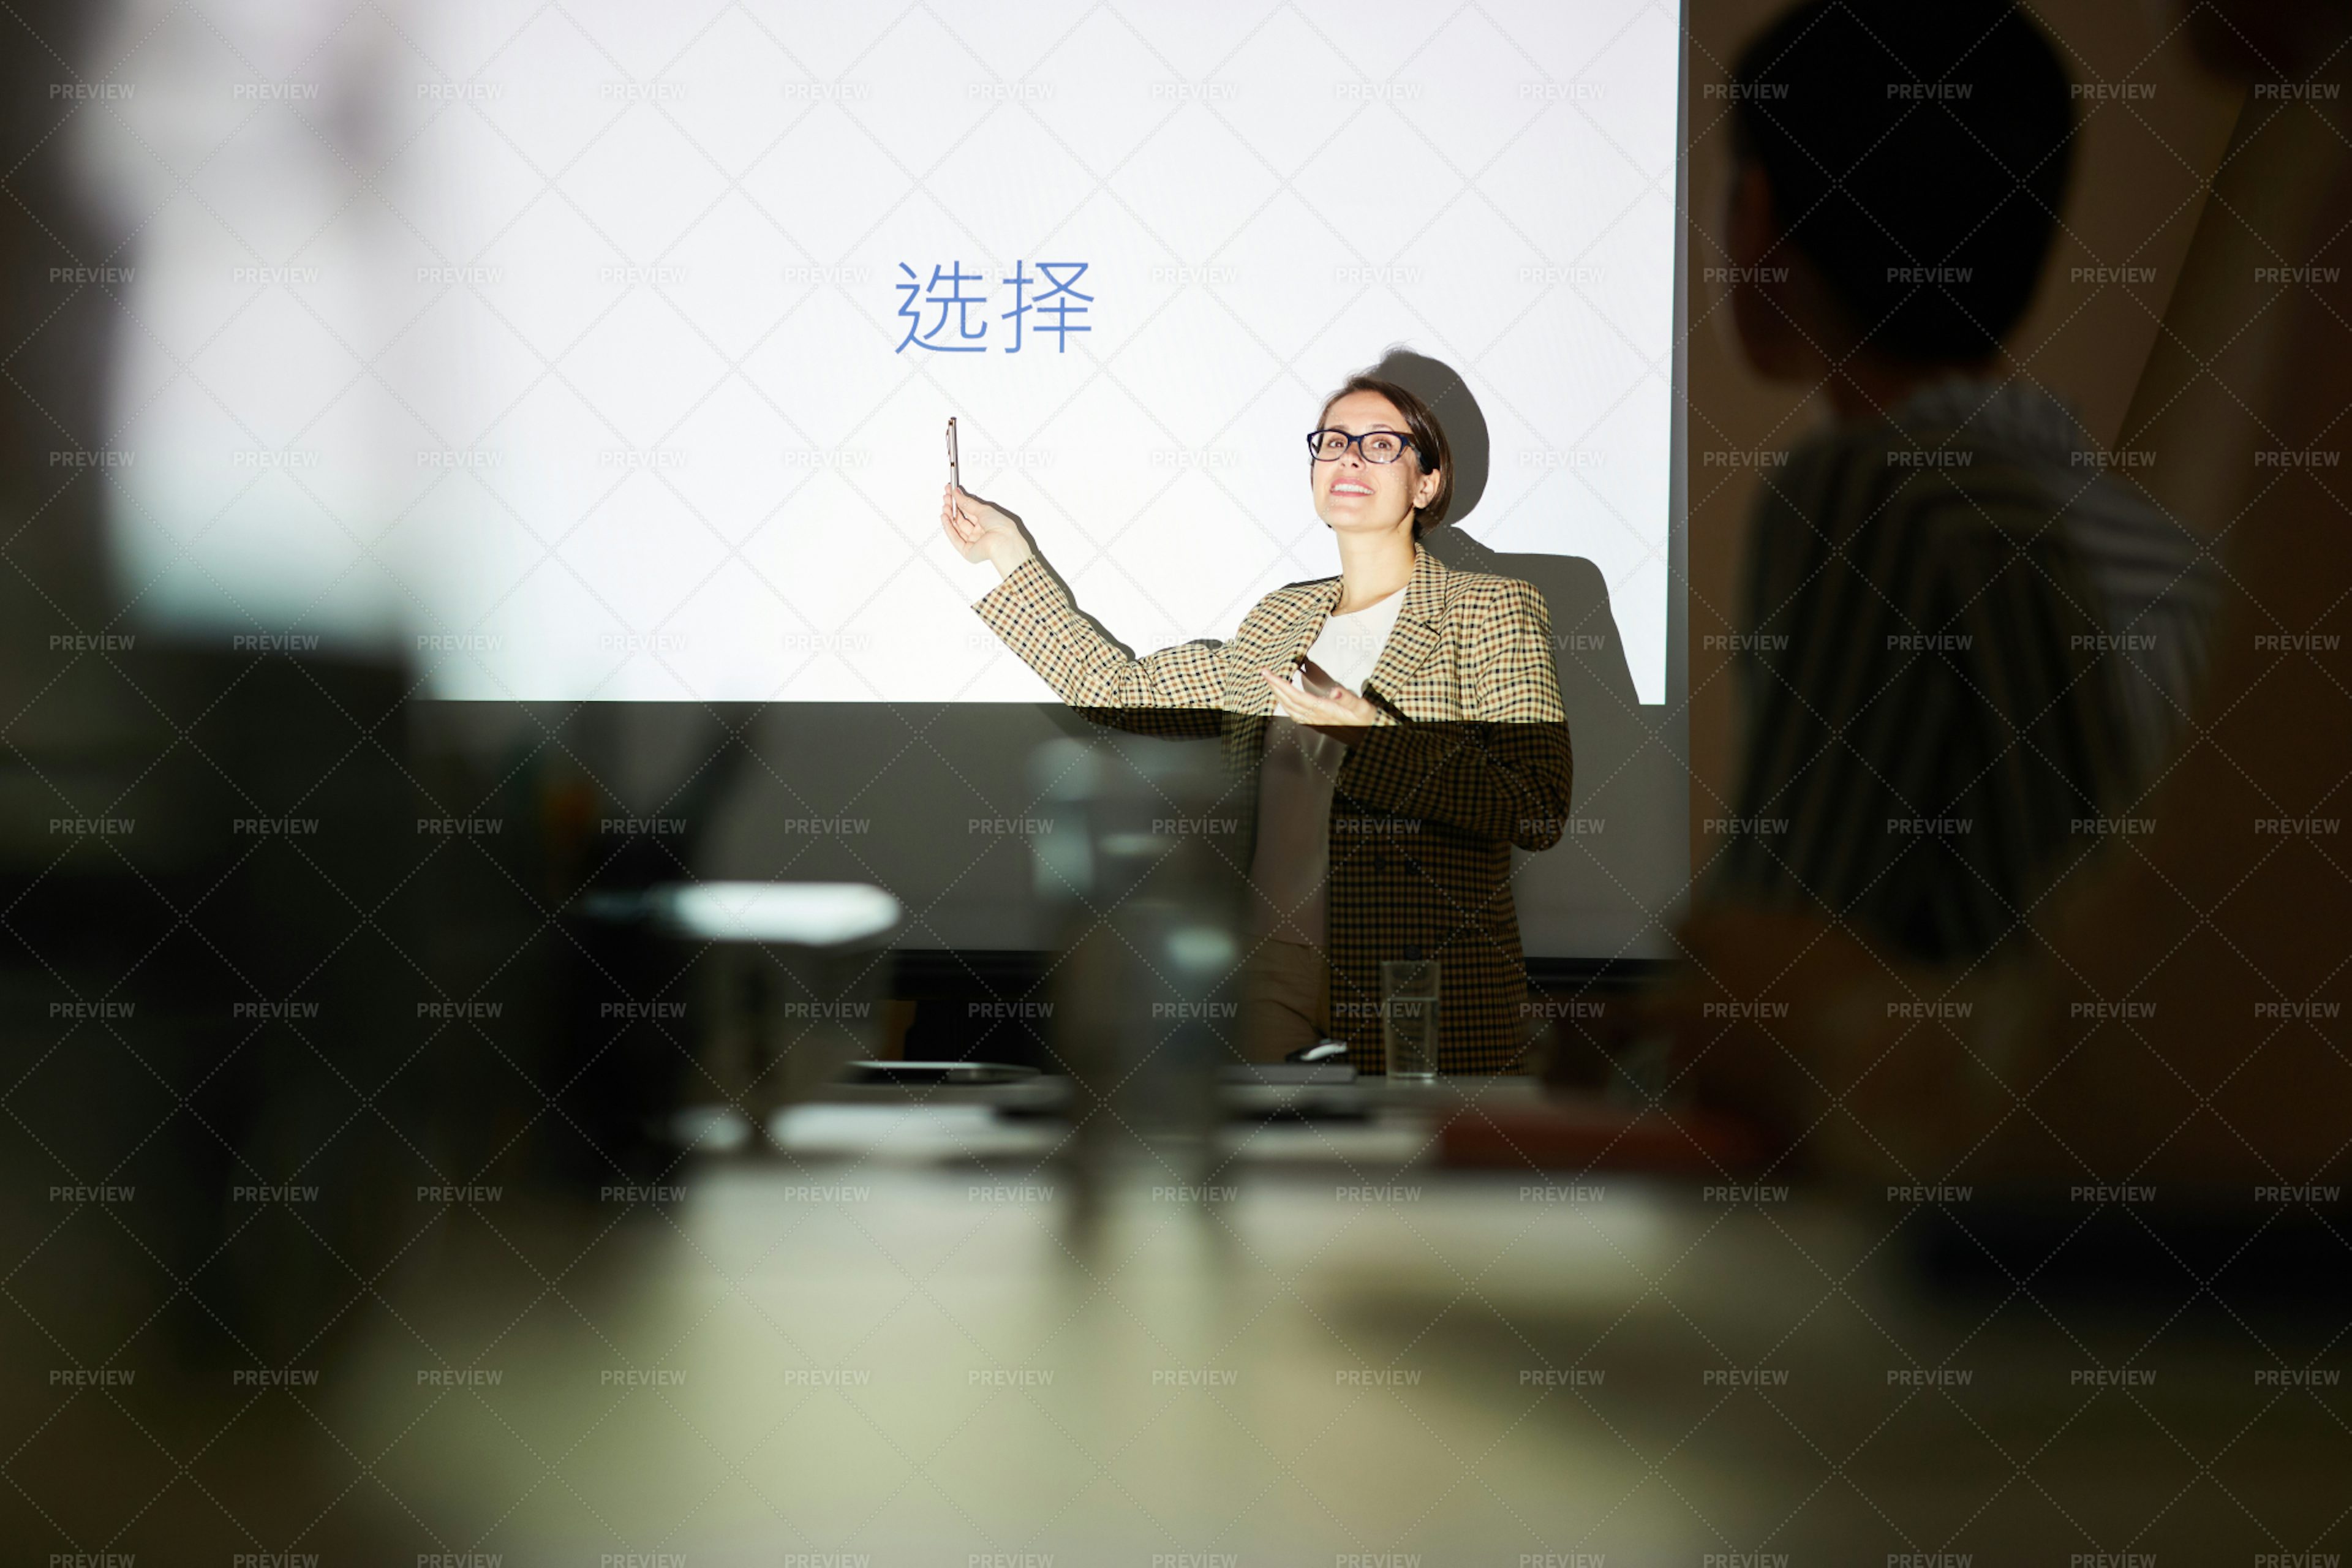 presentation in chinese meaning